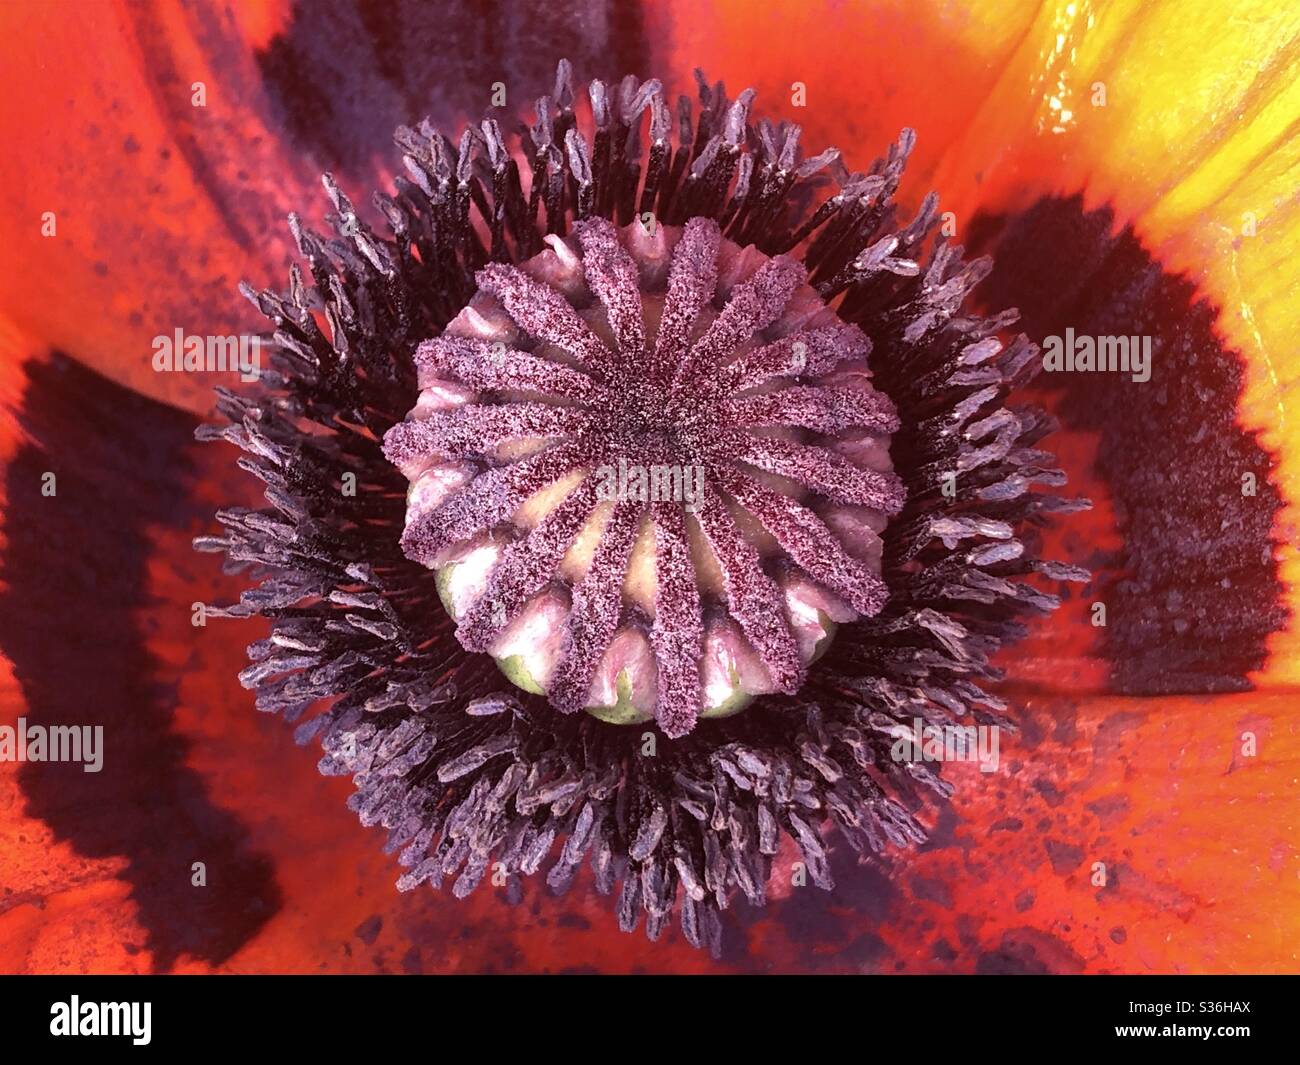 Close up of the inside of a Poppy flower Stock Photo